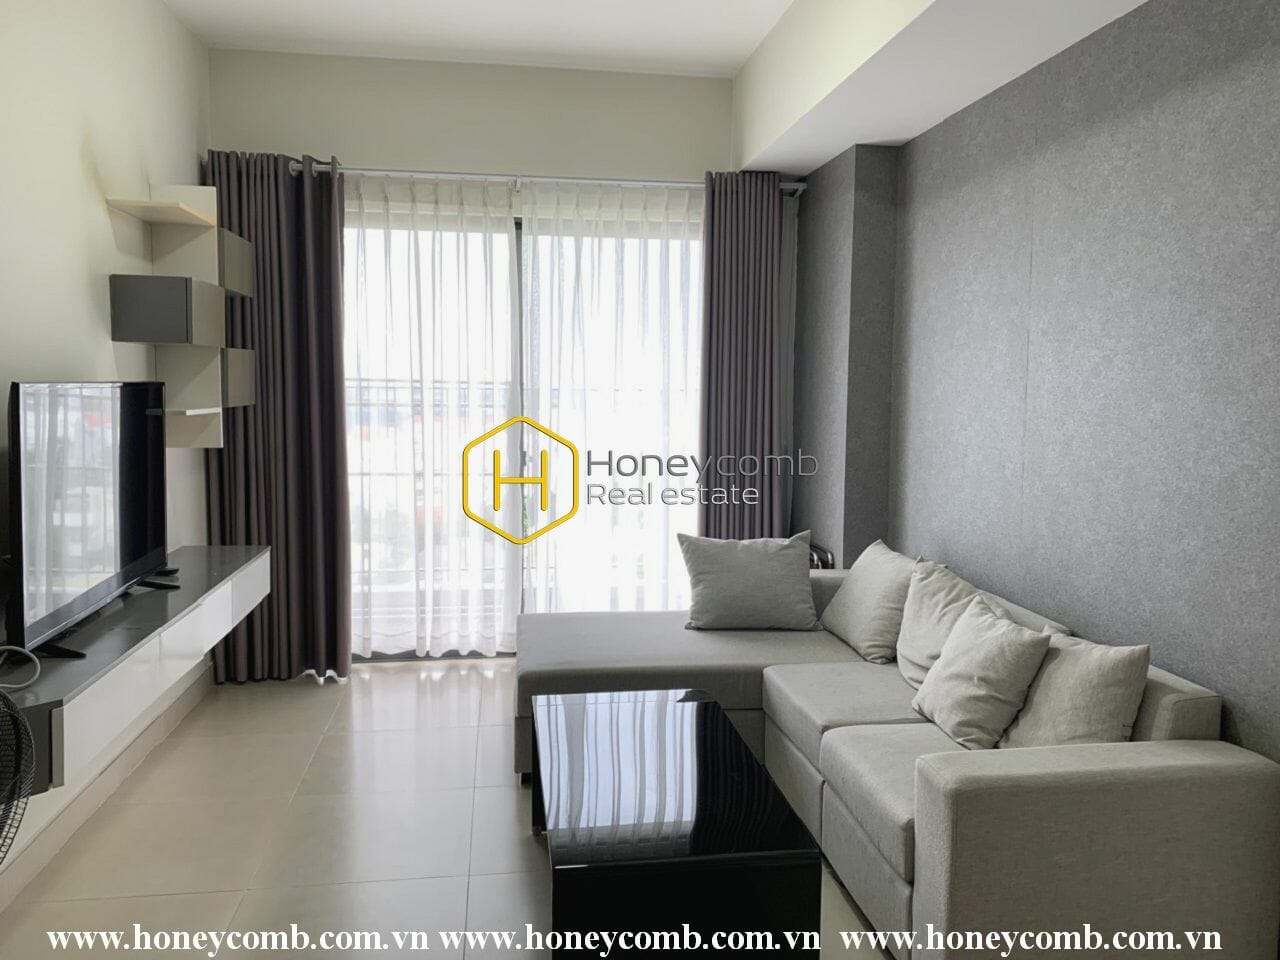 Masteri Thao Dien apartment: a part of your life – Honeycomb